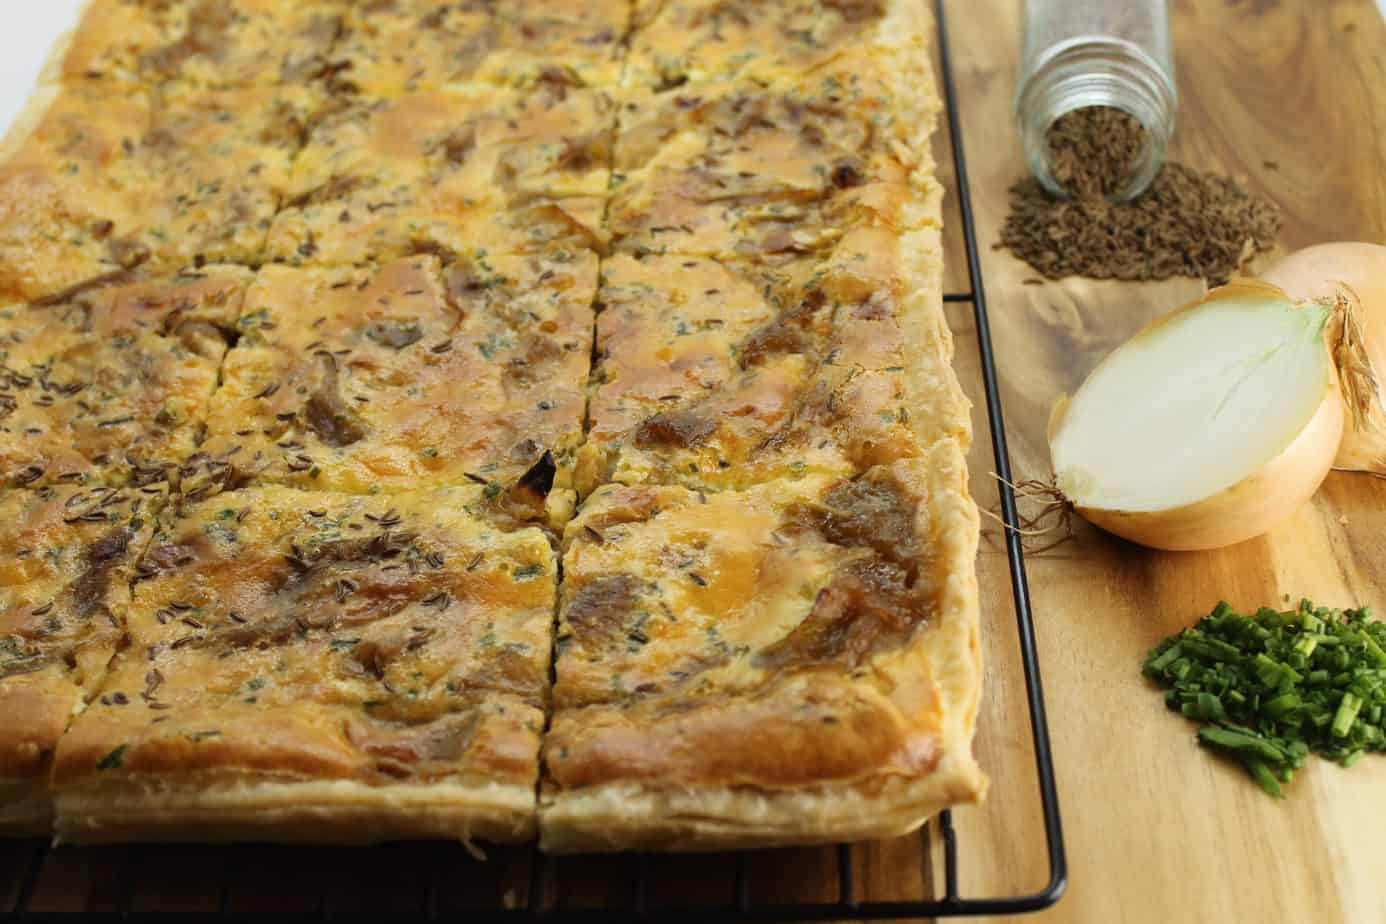 Perfect as an appetizer or entree, these German onion tarts even make a great lunch for work.